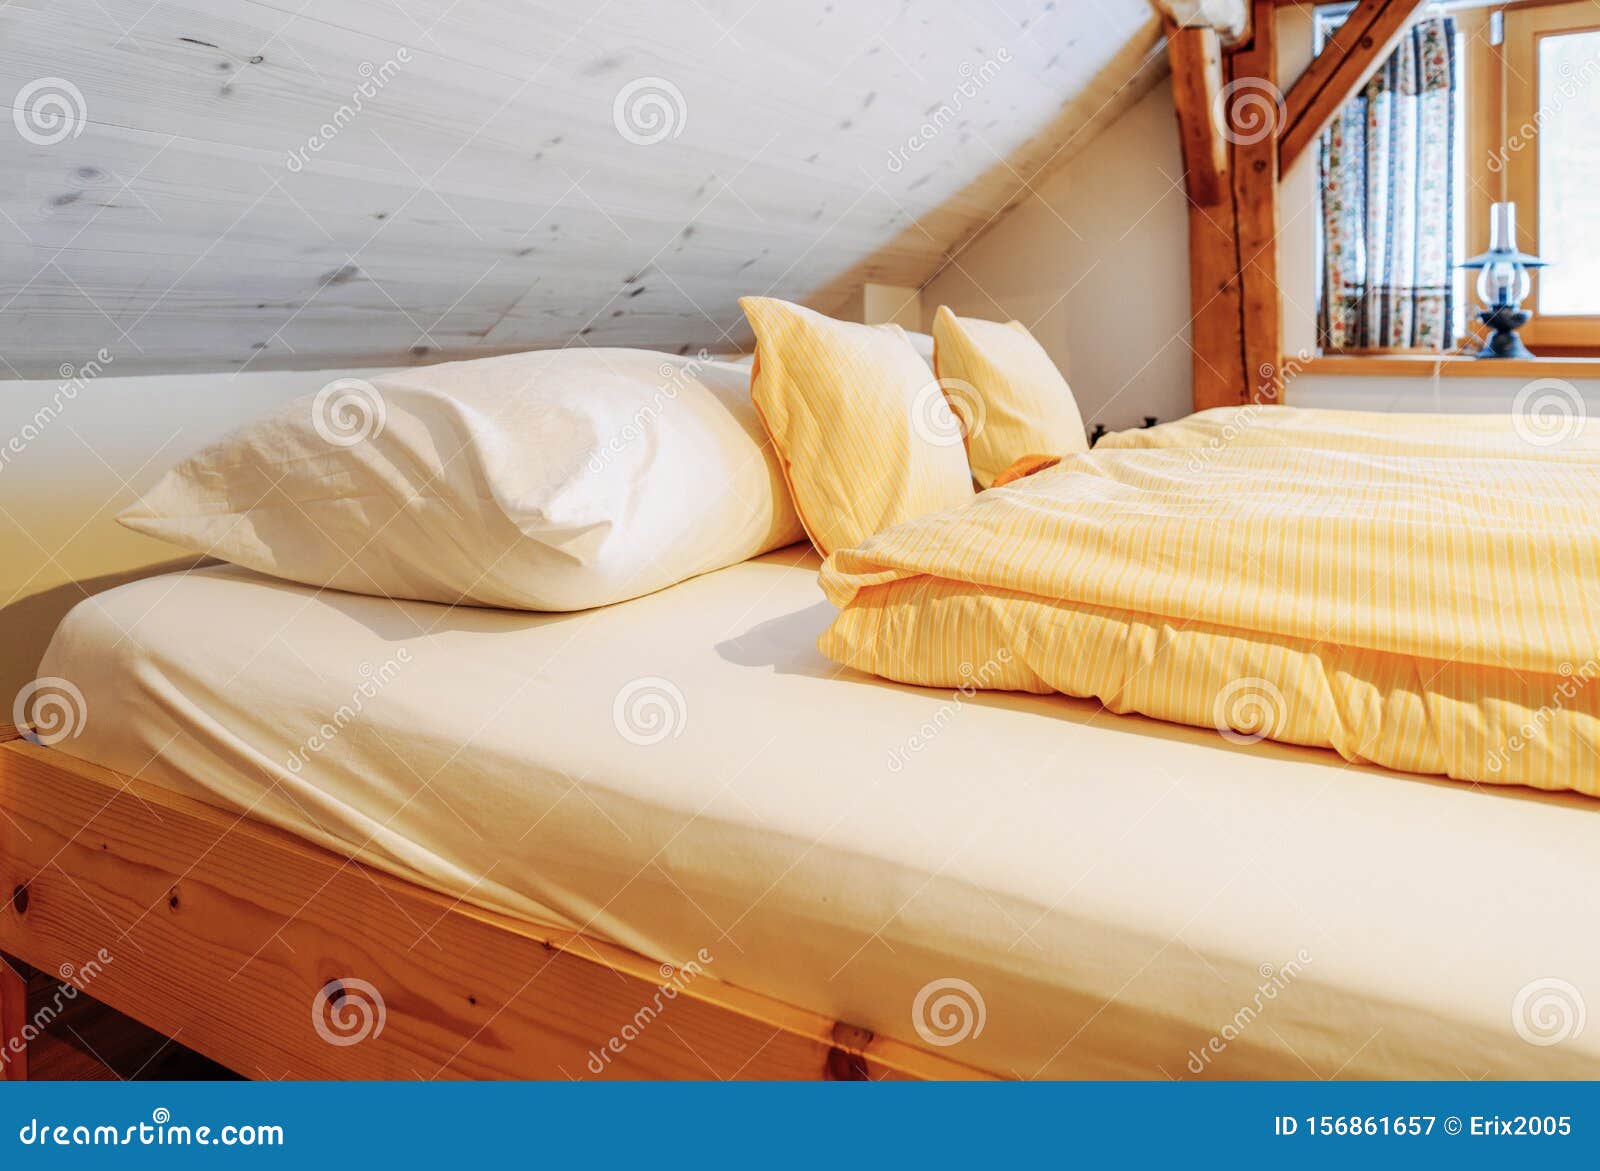 Interior Of Bedroom Modern Design Of Bed Style Stock Image Image Of Bright Apartment 156861657